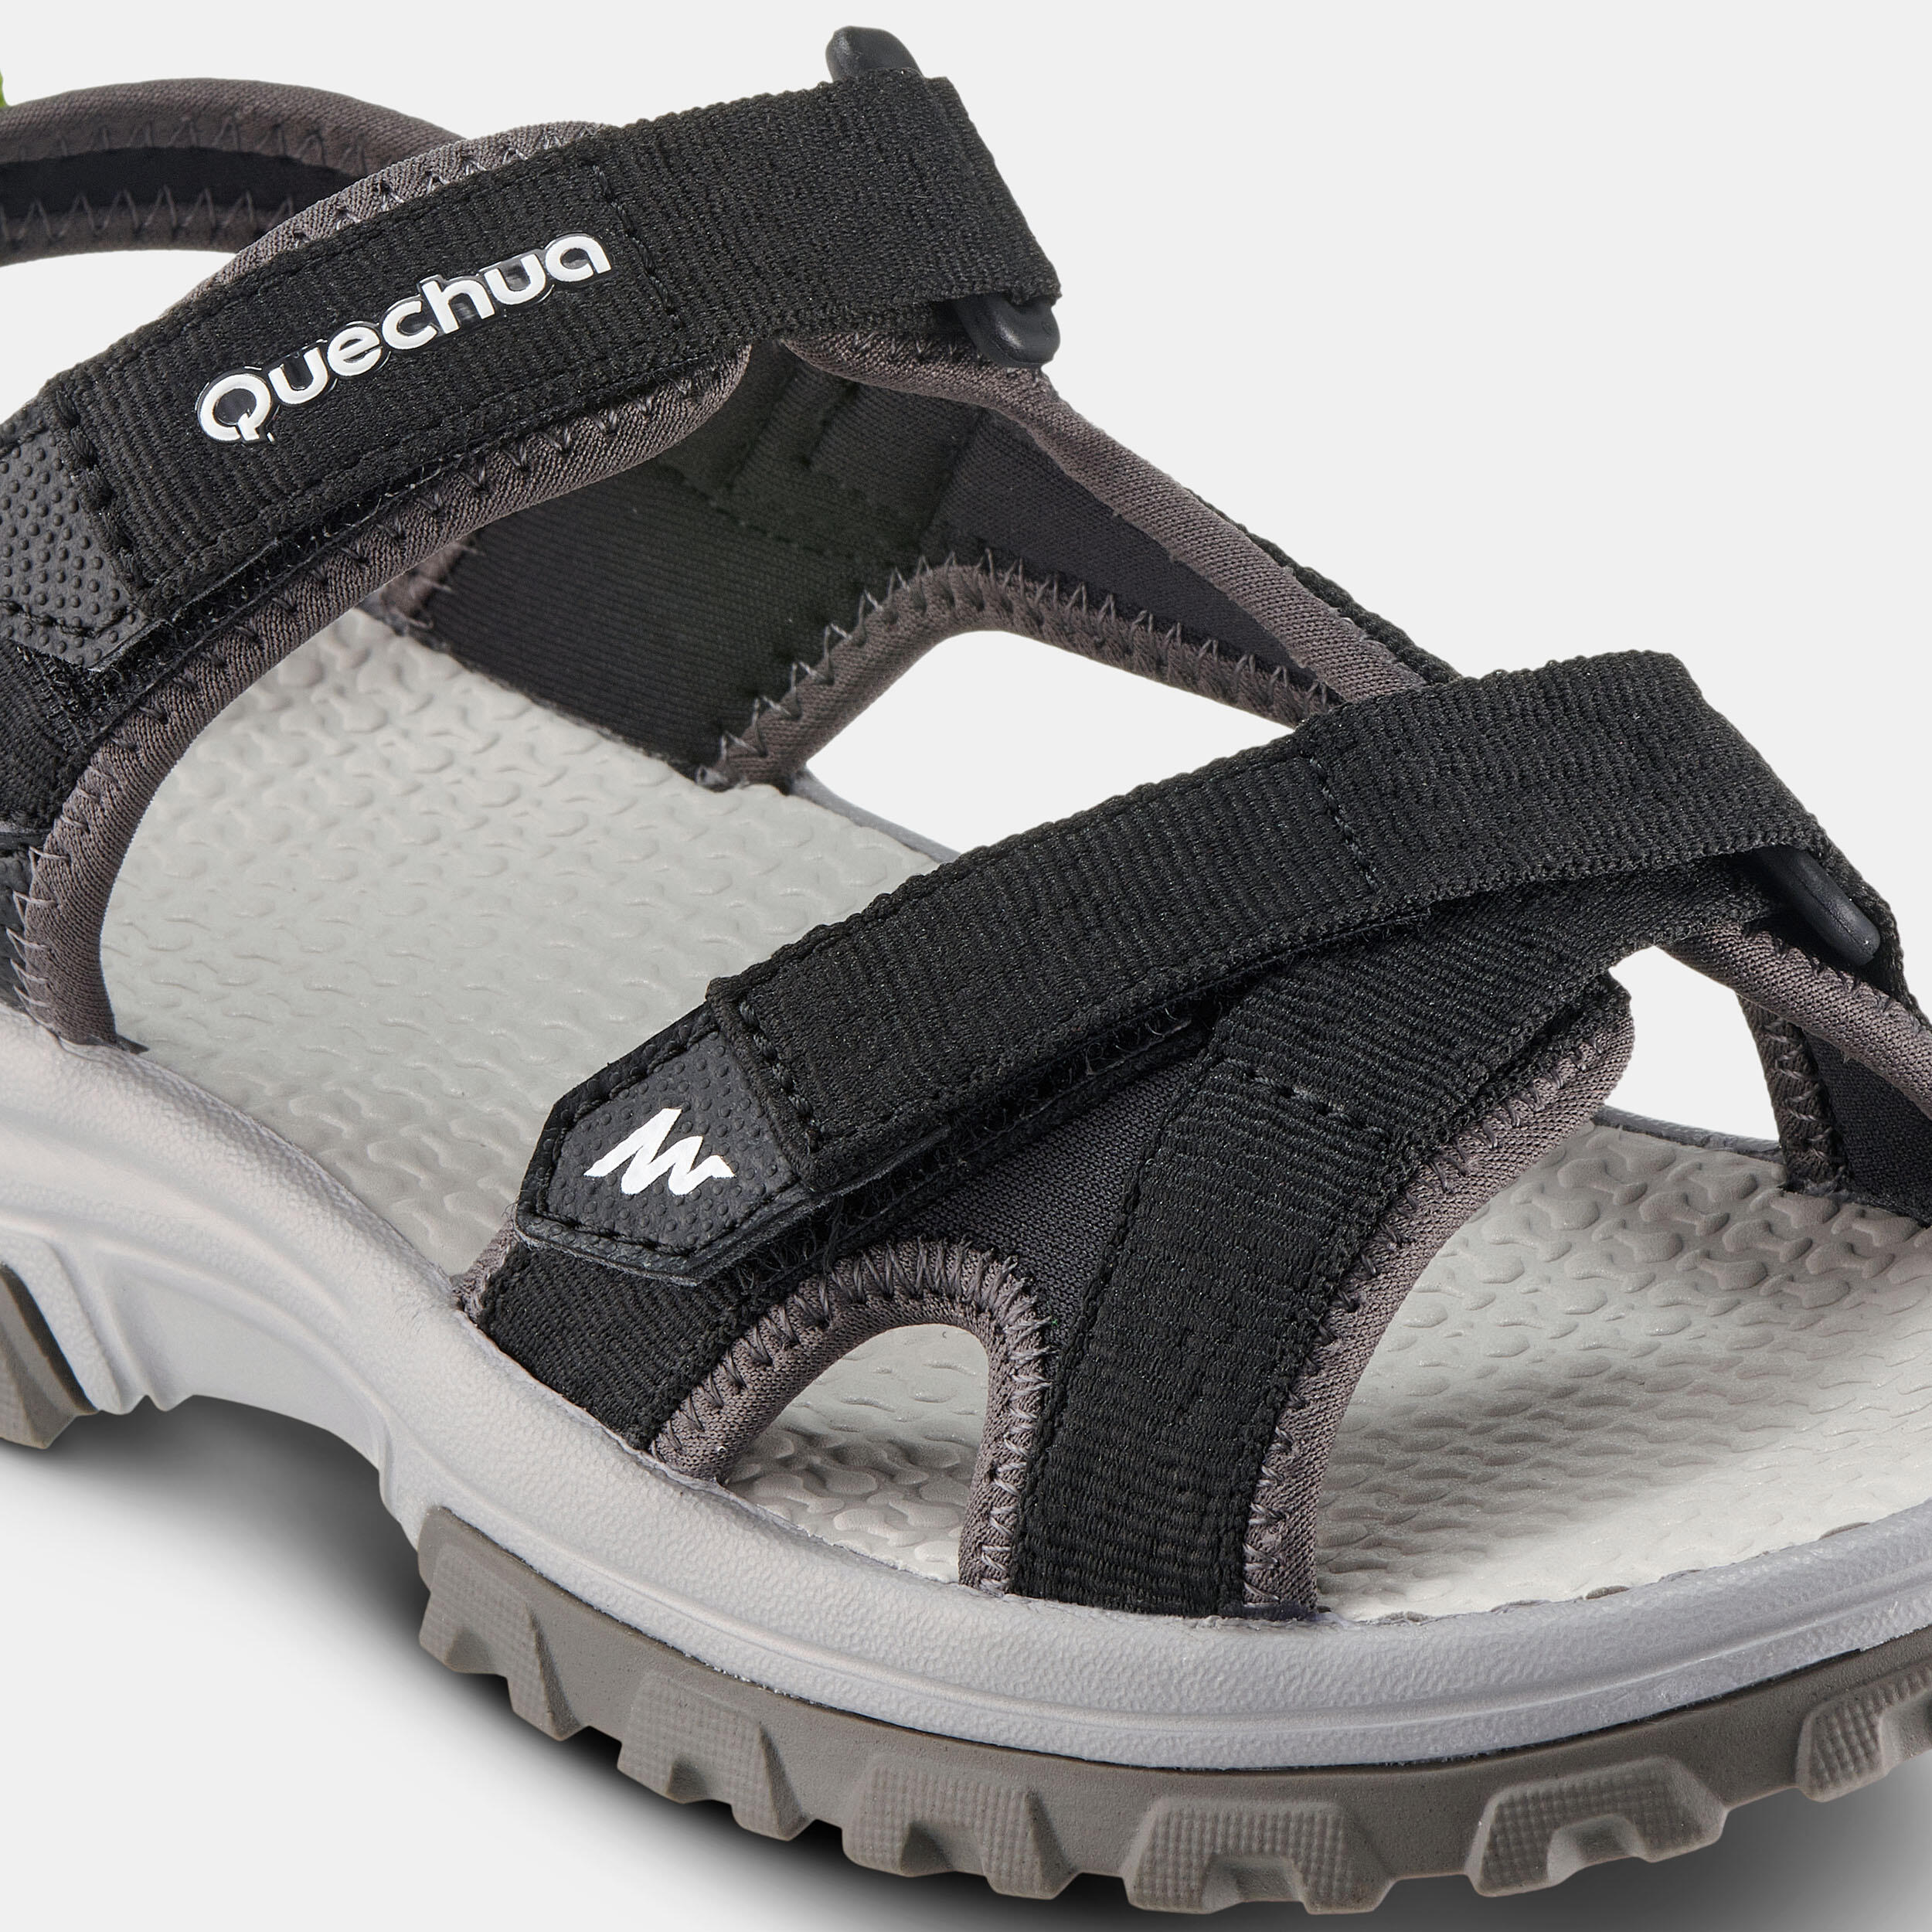 Kids’ Hiking Sandals MH120 TW  - Jr size 10 TO Adult size 6 - Black 6/6